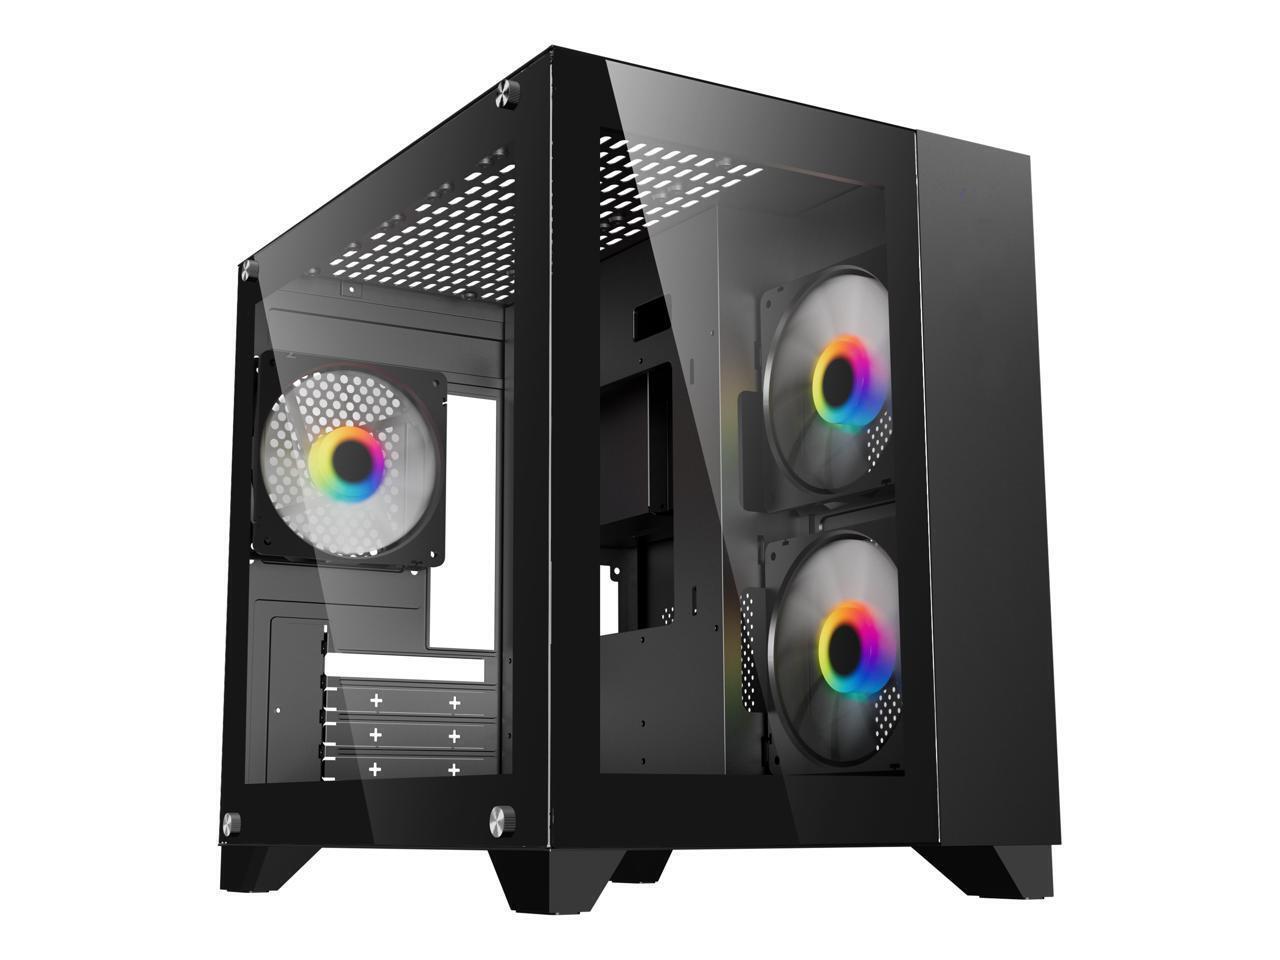 DIYPC ARGB-Q3-BK Black USB3.0 Tempered Glass Micro ATX Gaming Computer Case w/ D. Available Now for 